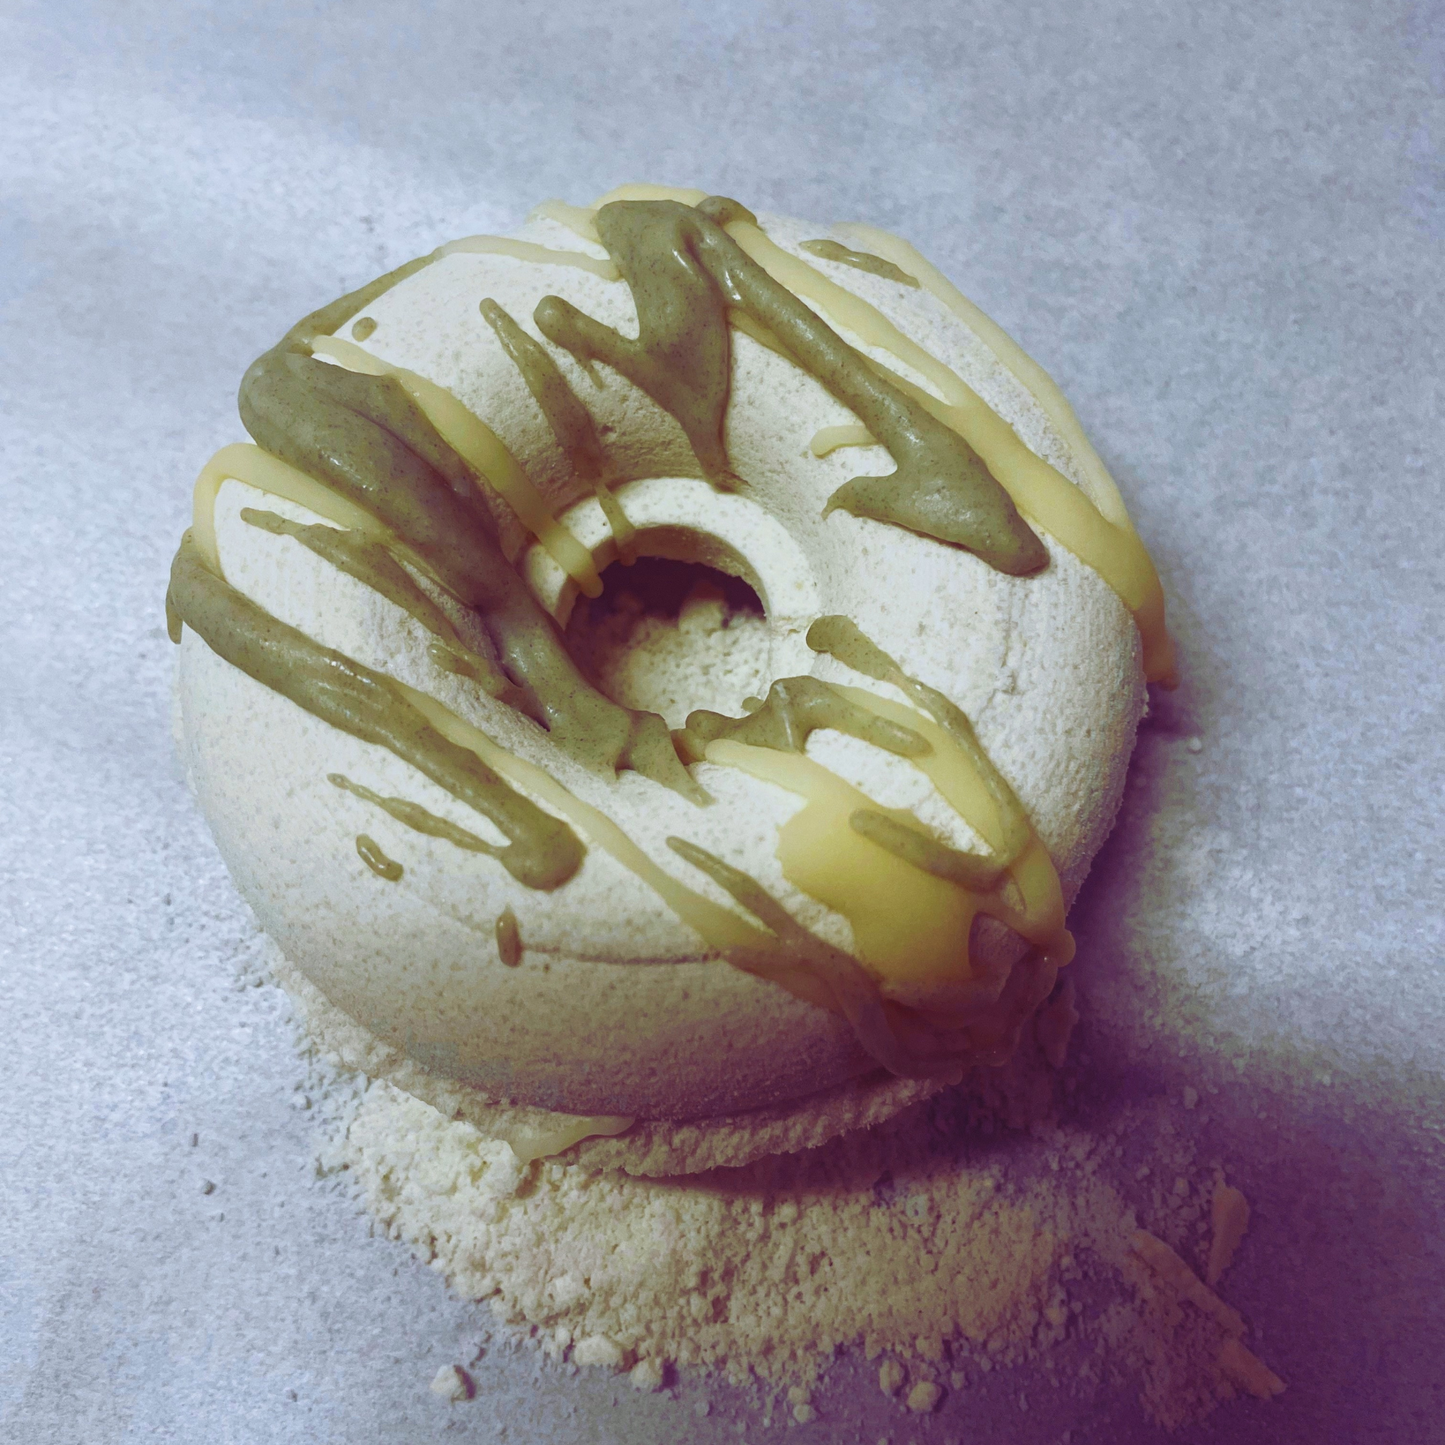 Eucalyptus Mint Donut Bath Bomb- Farmhouse Charm is made with plant-based ingredients and infused only with essential oils. This bath bomb uses Kaolin clay for color and contains moisturizing ingredients such as coconut oil, cocoa butter, and colloidal oatmeal. It does not contain any artificial colorants and fragrance. To Use: Drop or hold in bath water. Enjoy the fizzing action, wonderful aromas and nourishing oils.